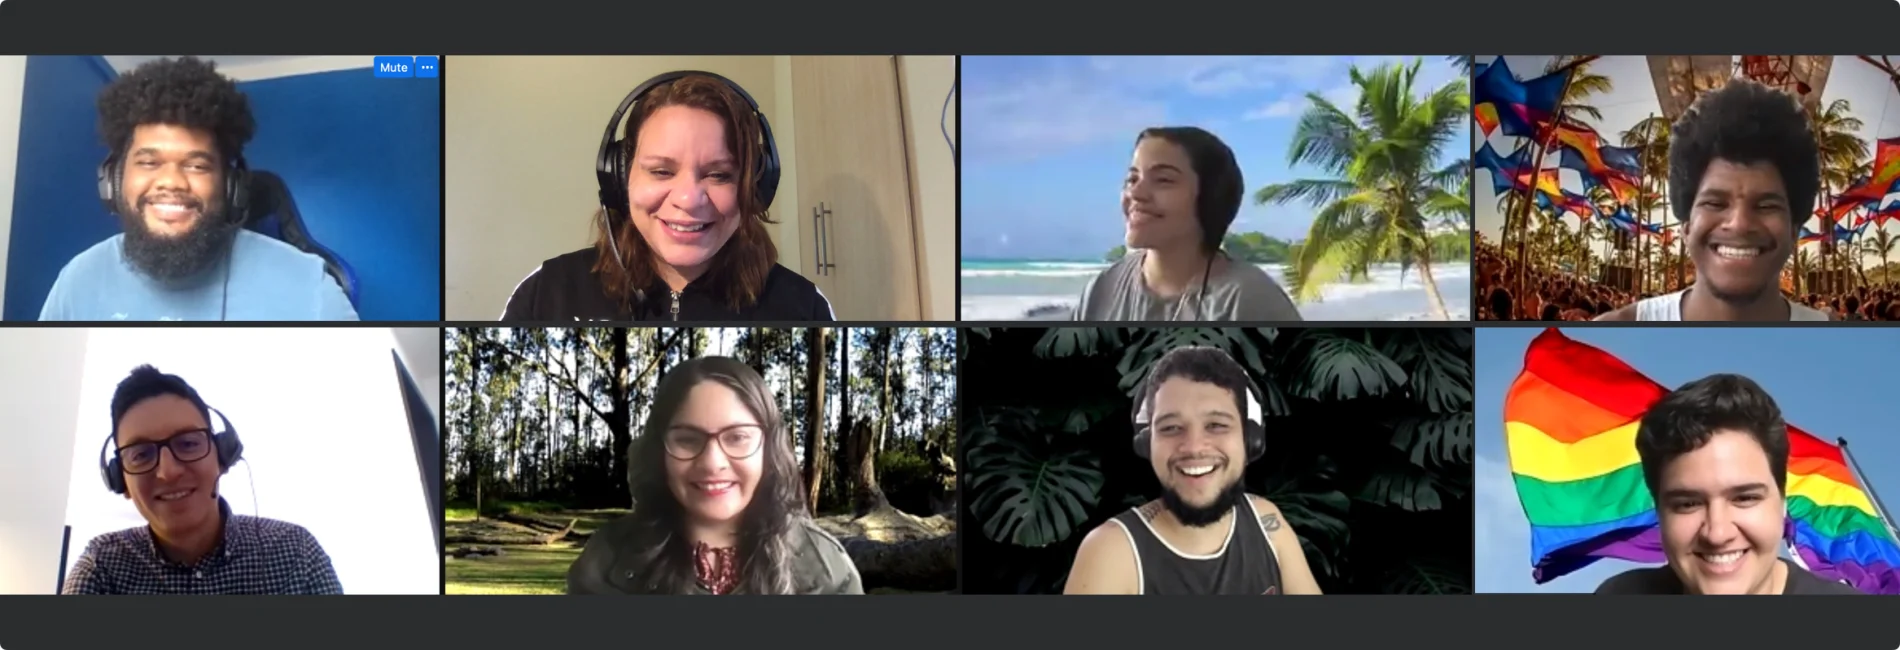 Screenshot of the ThoughtWorks team on a conference call.